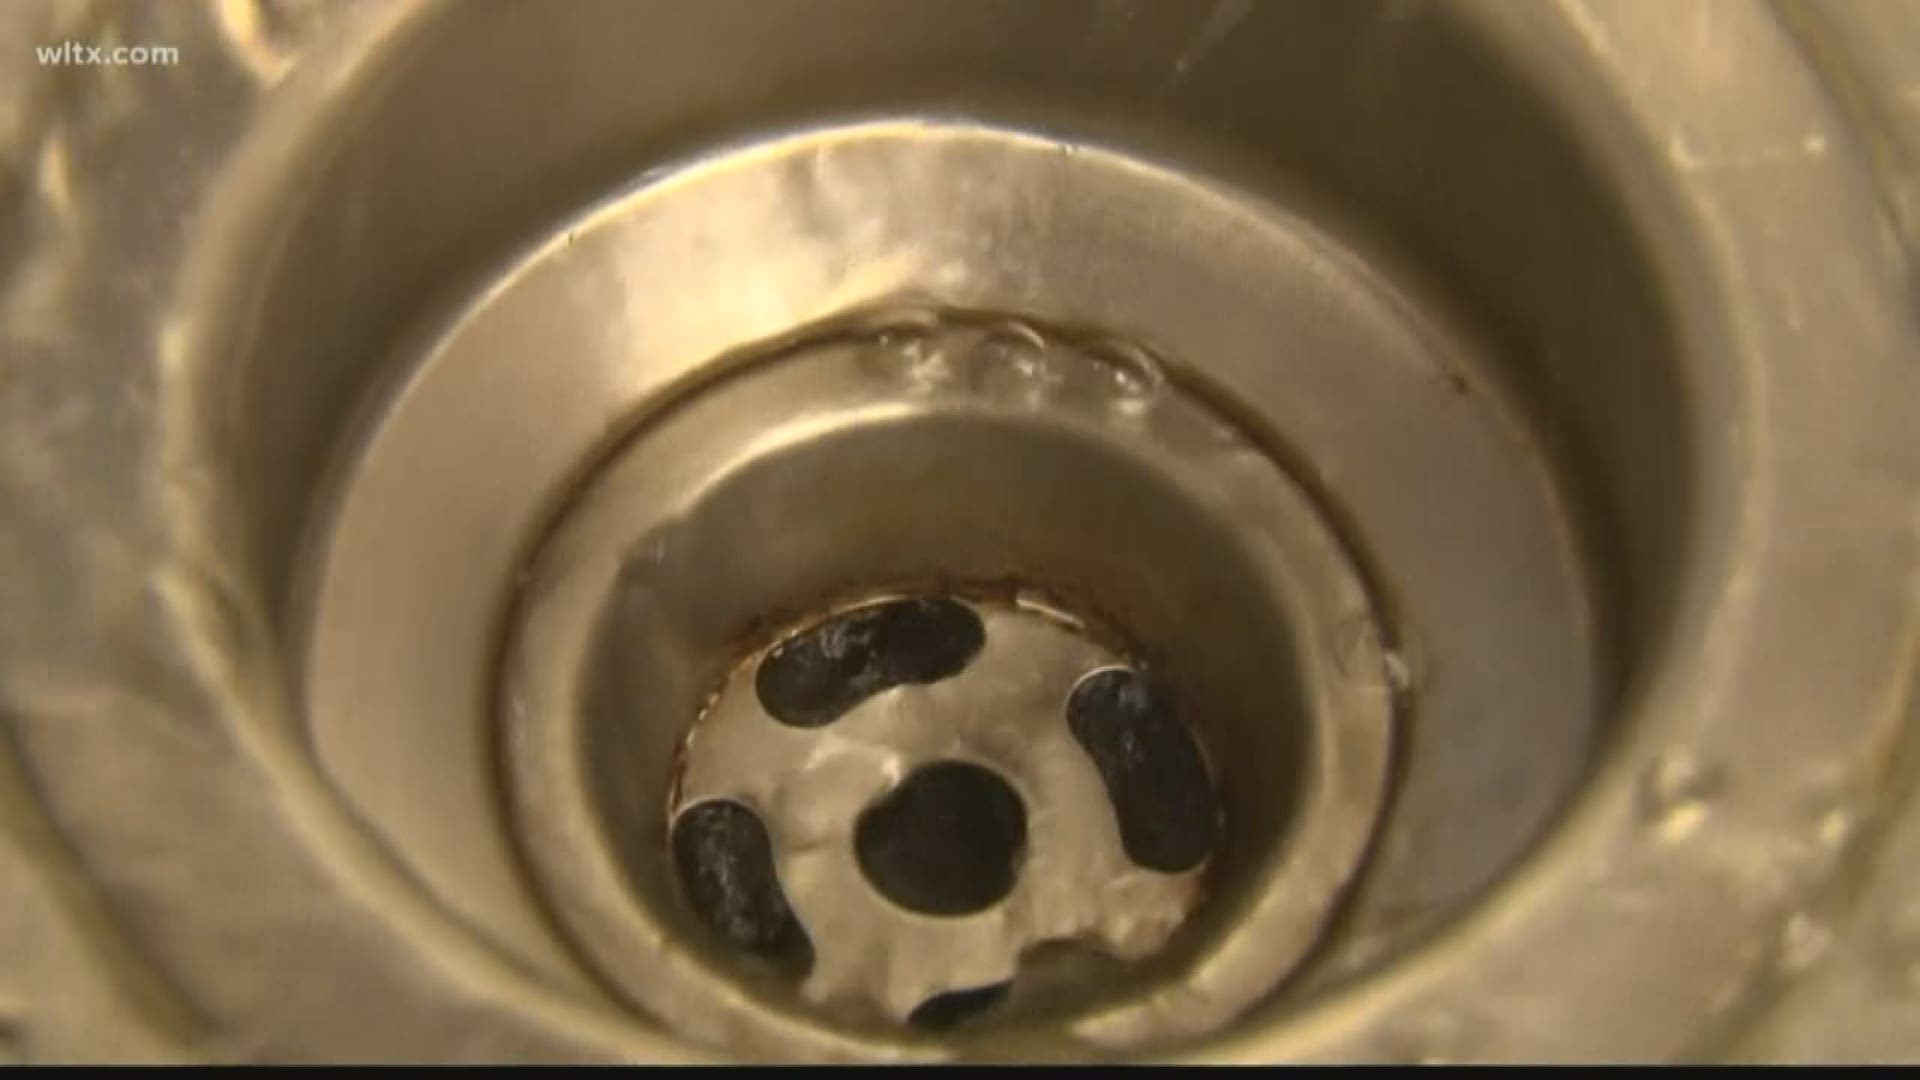 Irmo residents have been complaining that their water is tasting like dirt with an unpleasant smell.